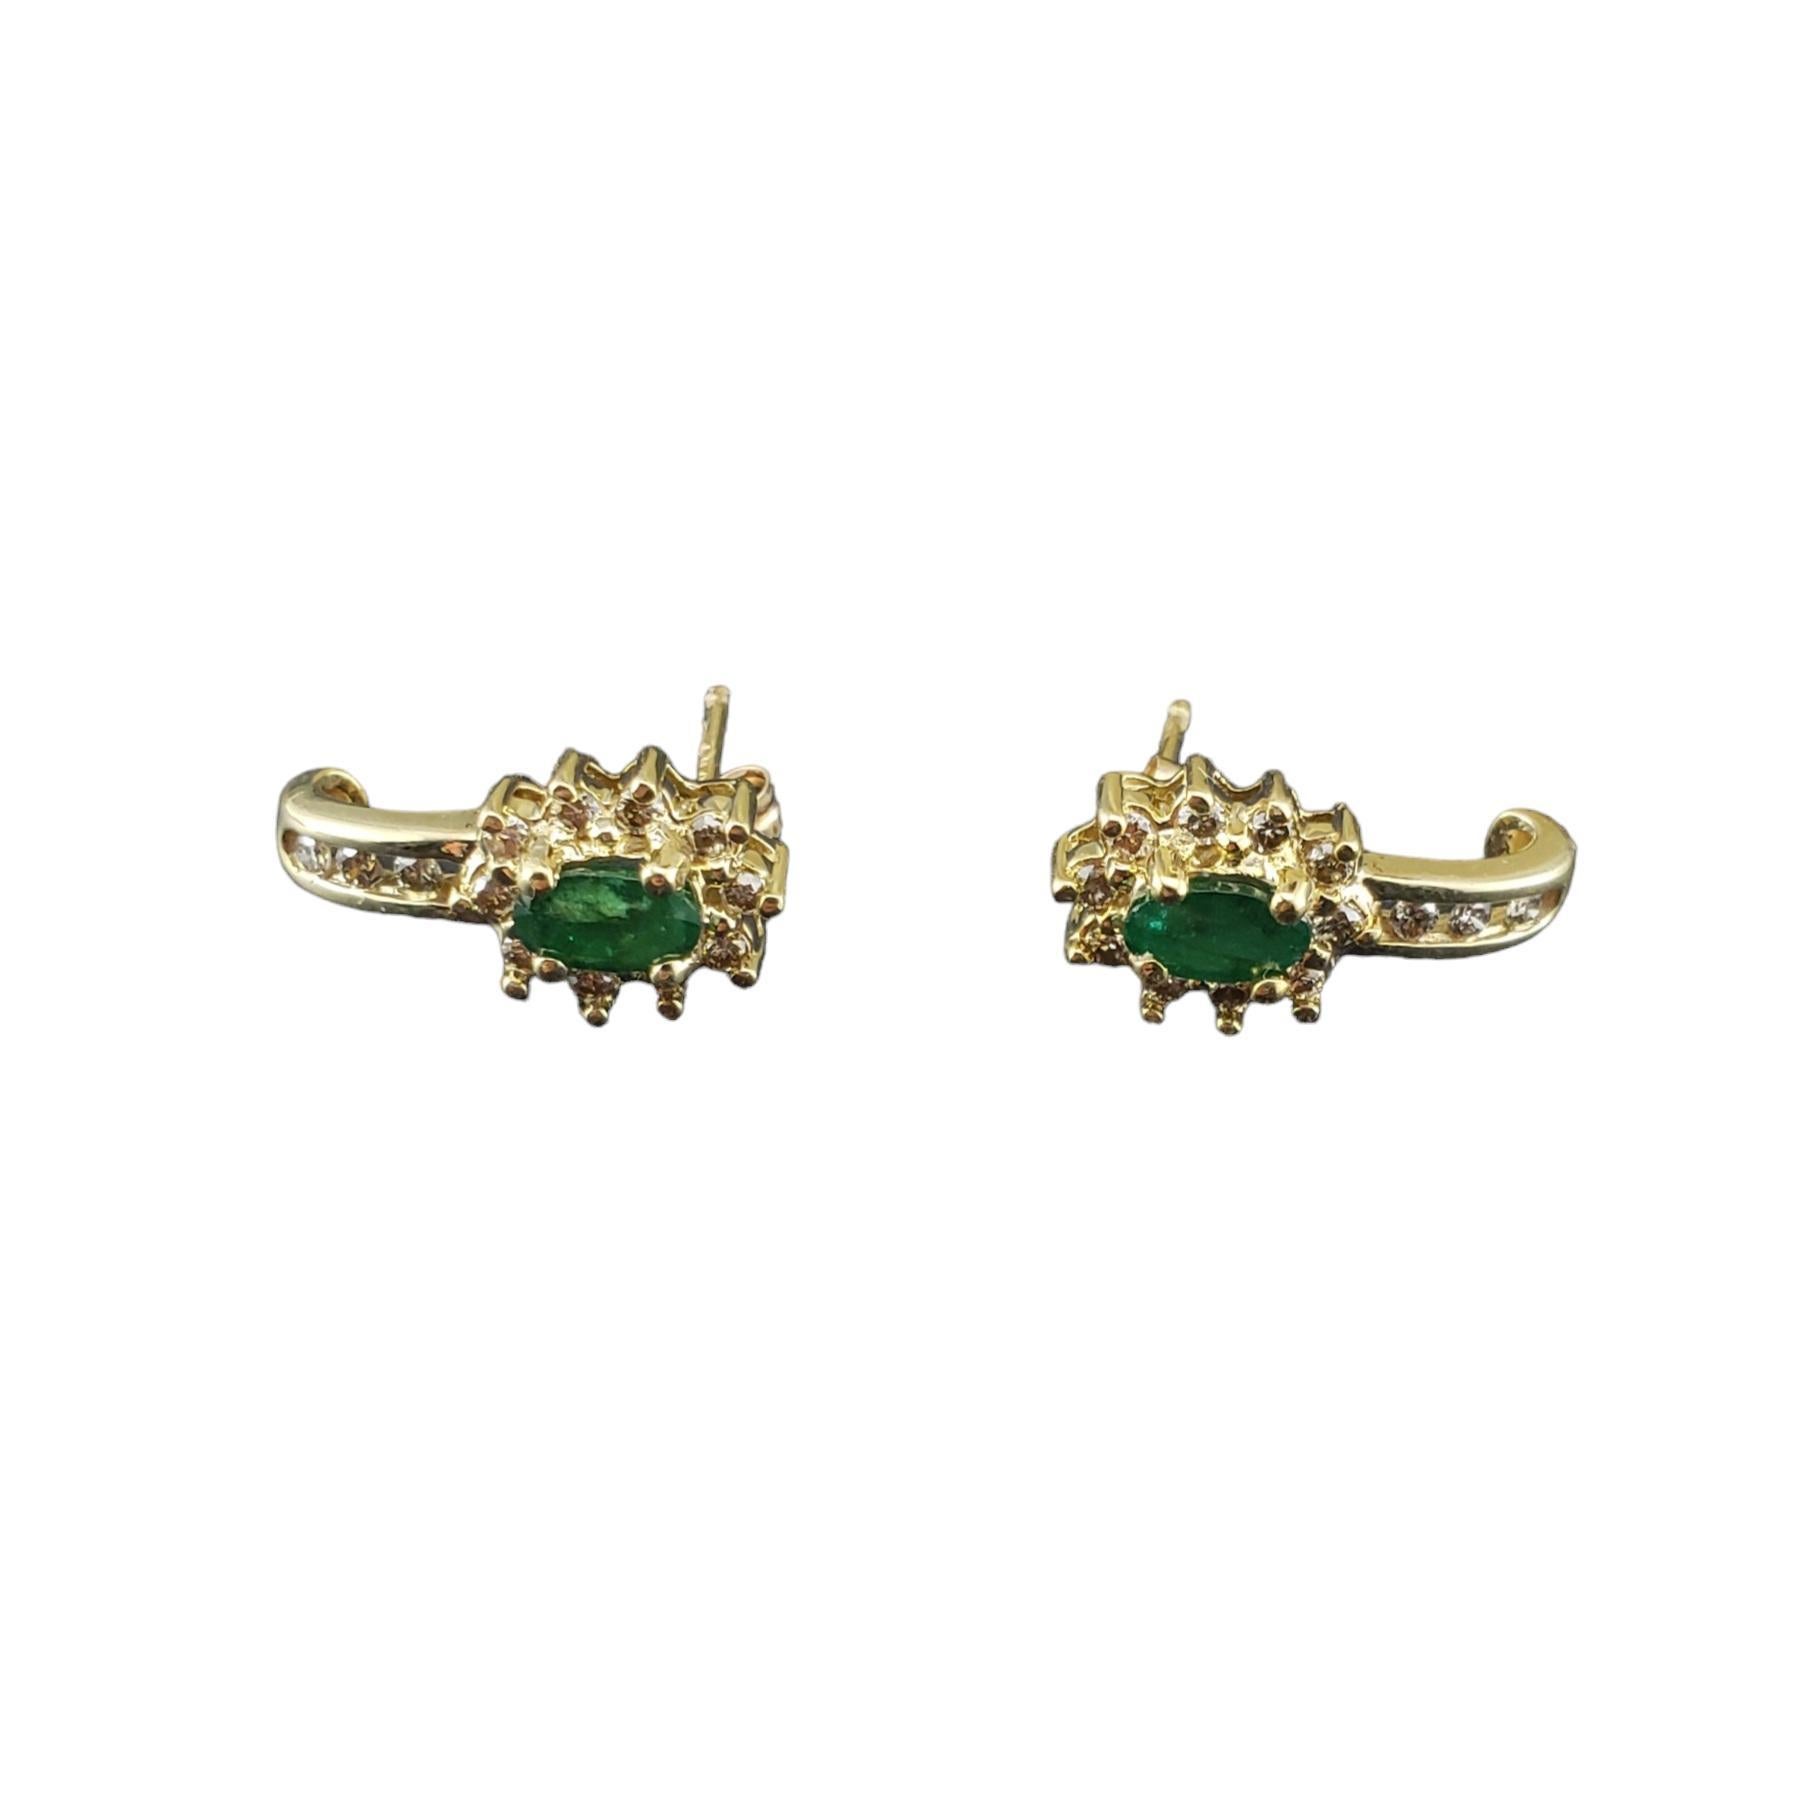 Vintage 14 Karat Yellow Gold Emerald and Diamond Earrings JAGi Certified-

These stunning earrings each feature two oval cut natural emeralds (5 mm x 2.9 mm) and 13 round brilliant cut diamonds set in classic 14K yellow gold.  Push back